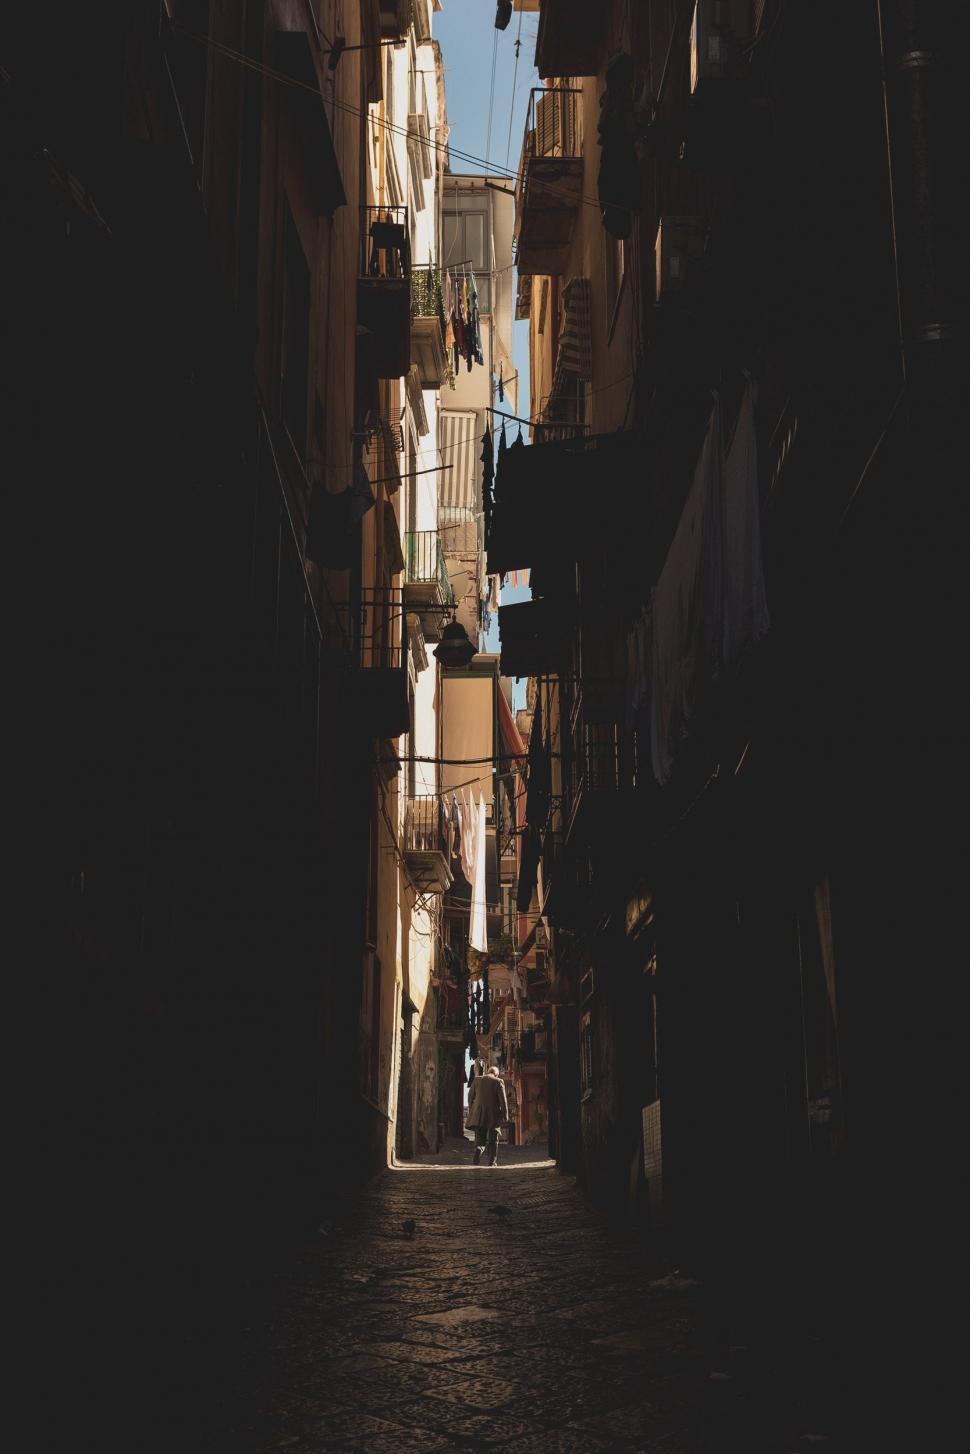 Free Image of Narrow Alleyway With Buildings on Both Sides 